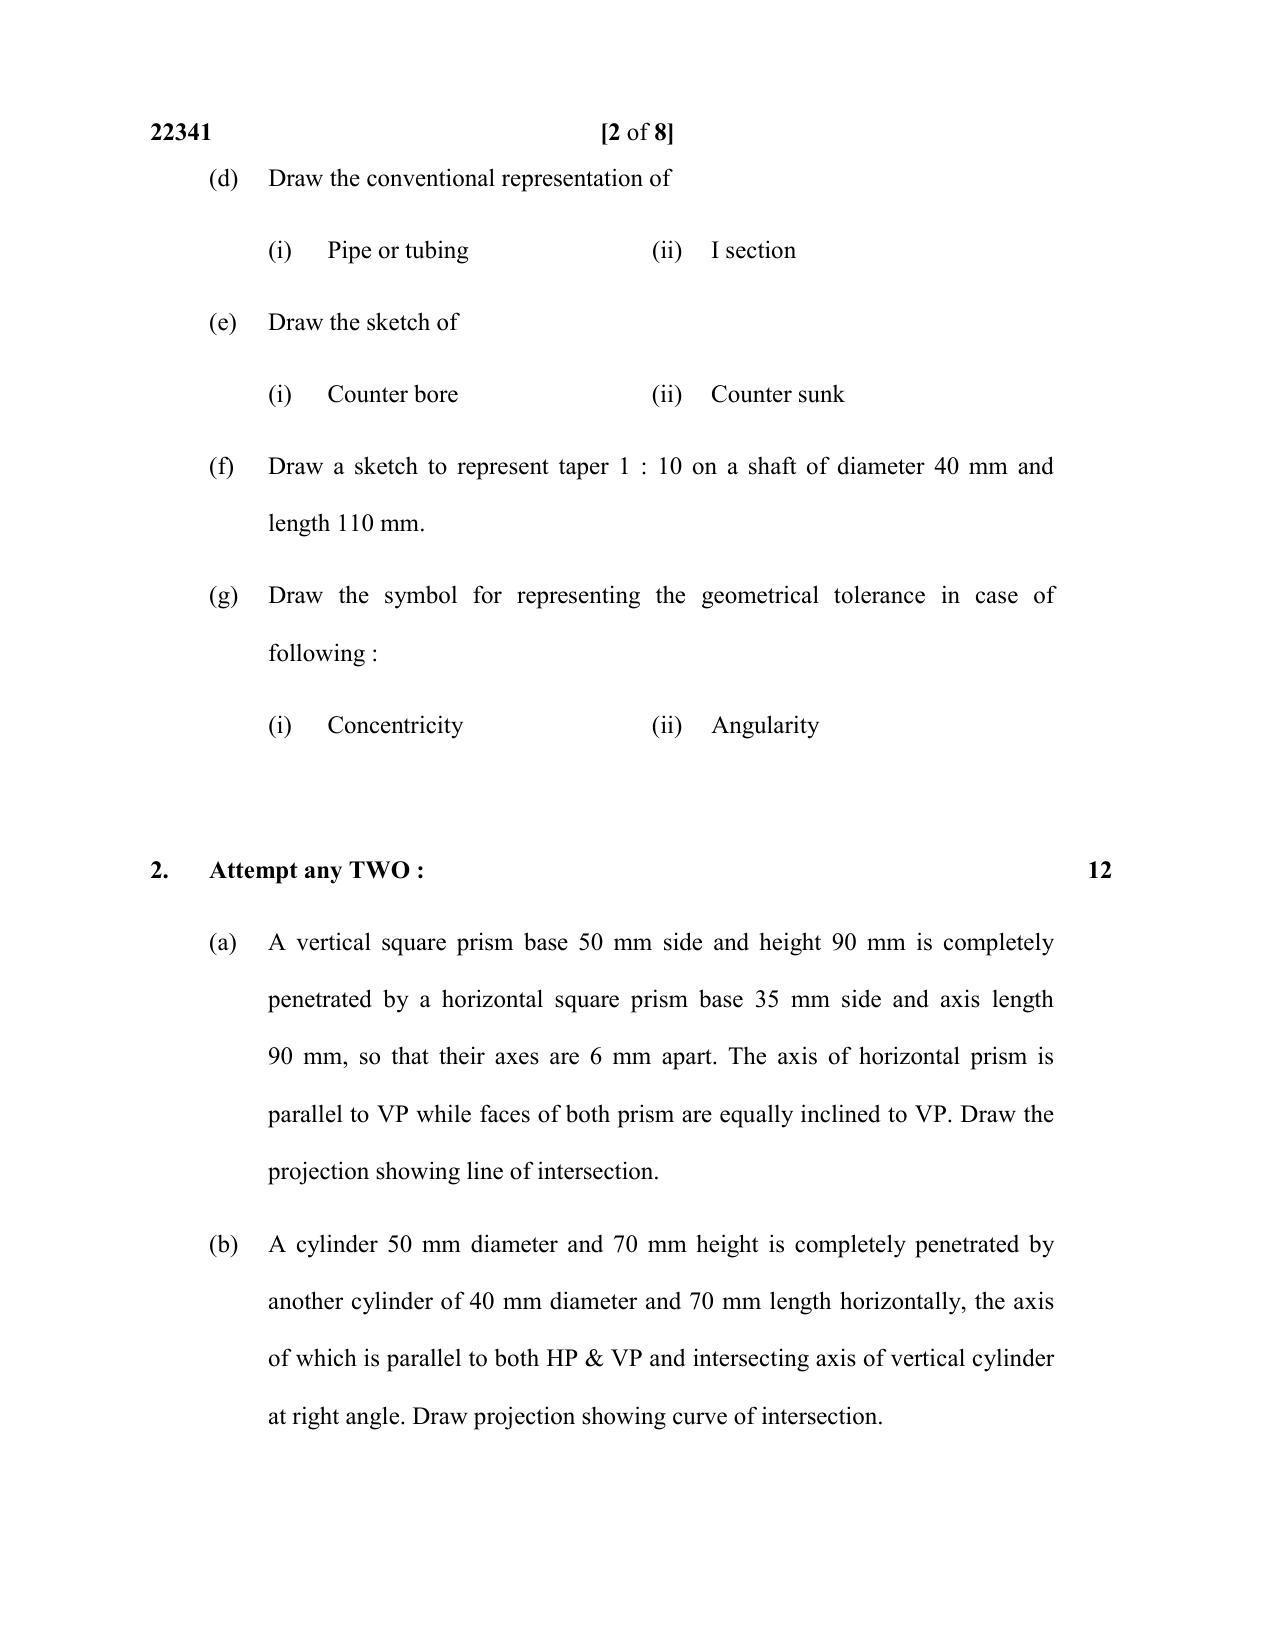 MSBTE Question Paper - 2019 - Mechanical working Drawing - Page 2